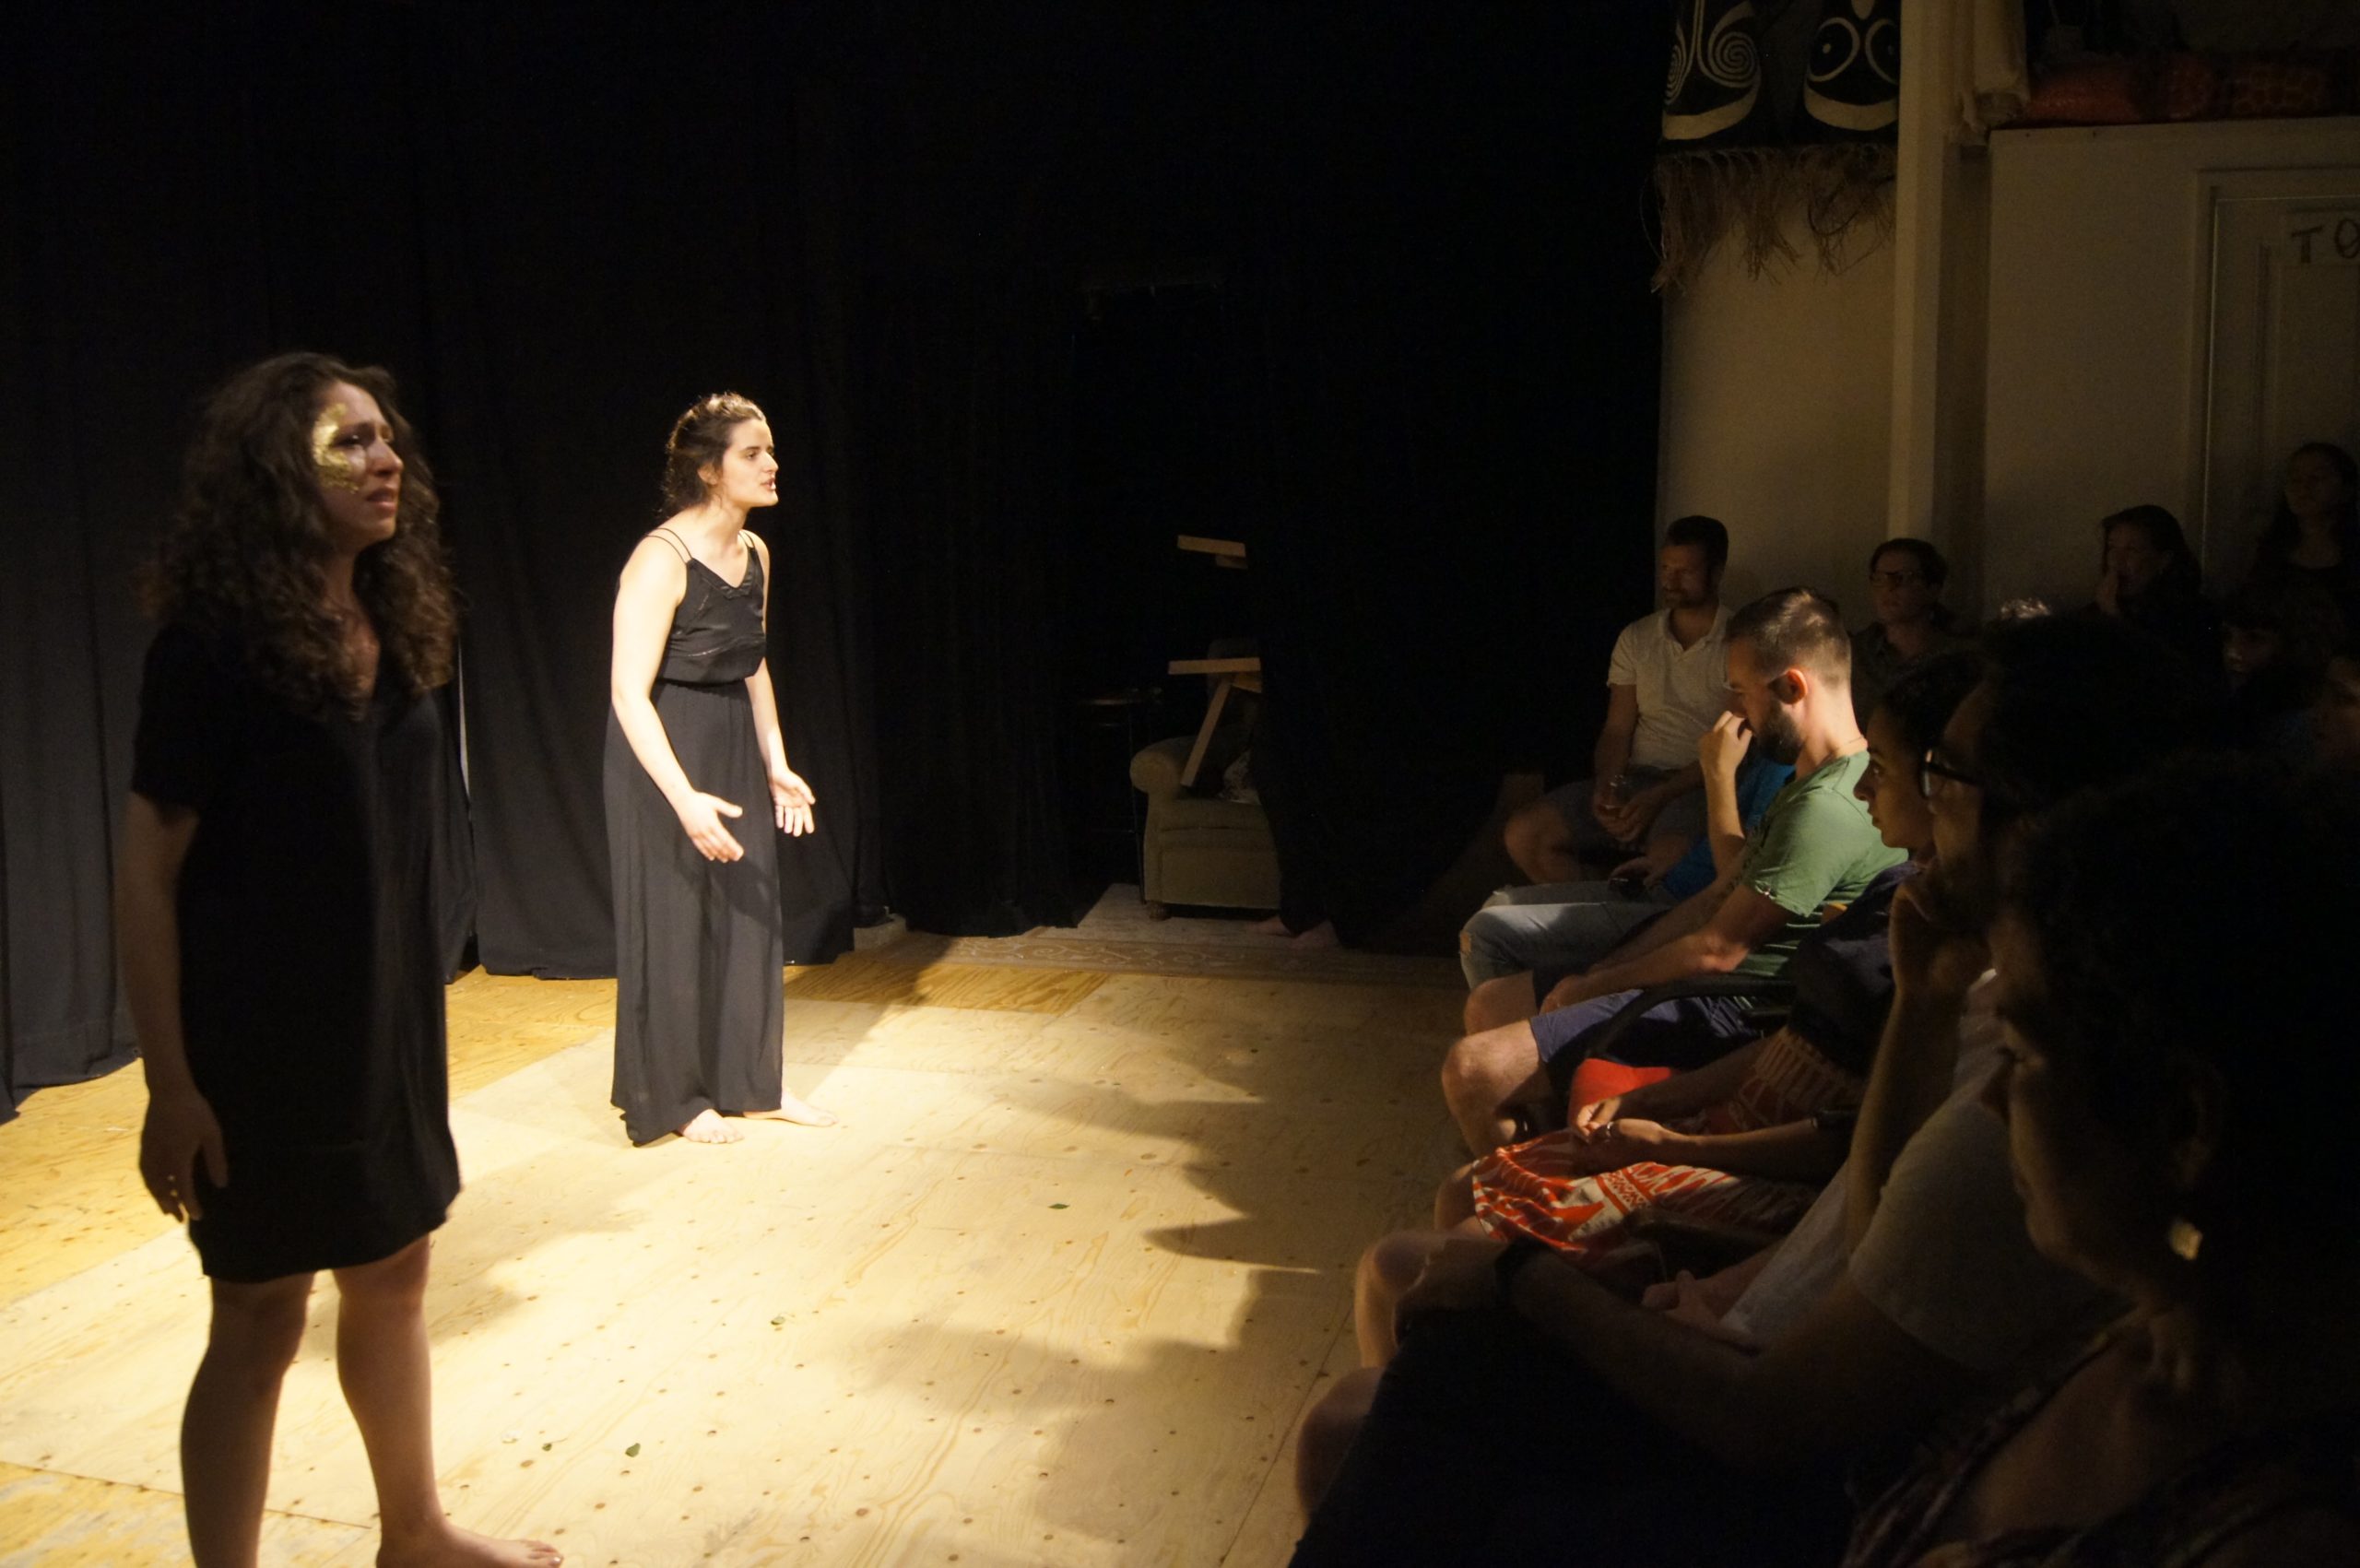 Theatre performance, two women on stage with black dresses, standing in front of audience. They are crying while speaking.